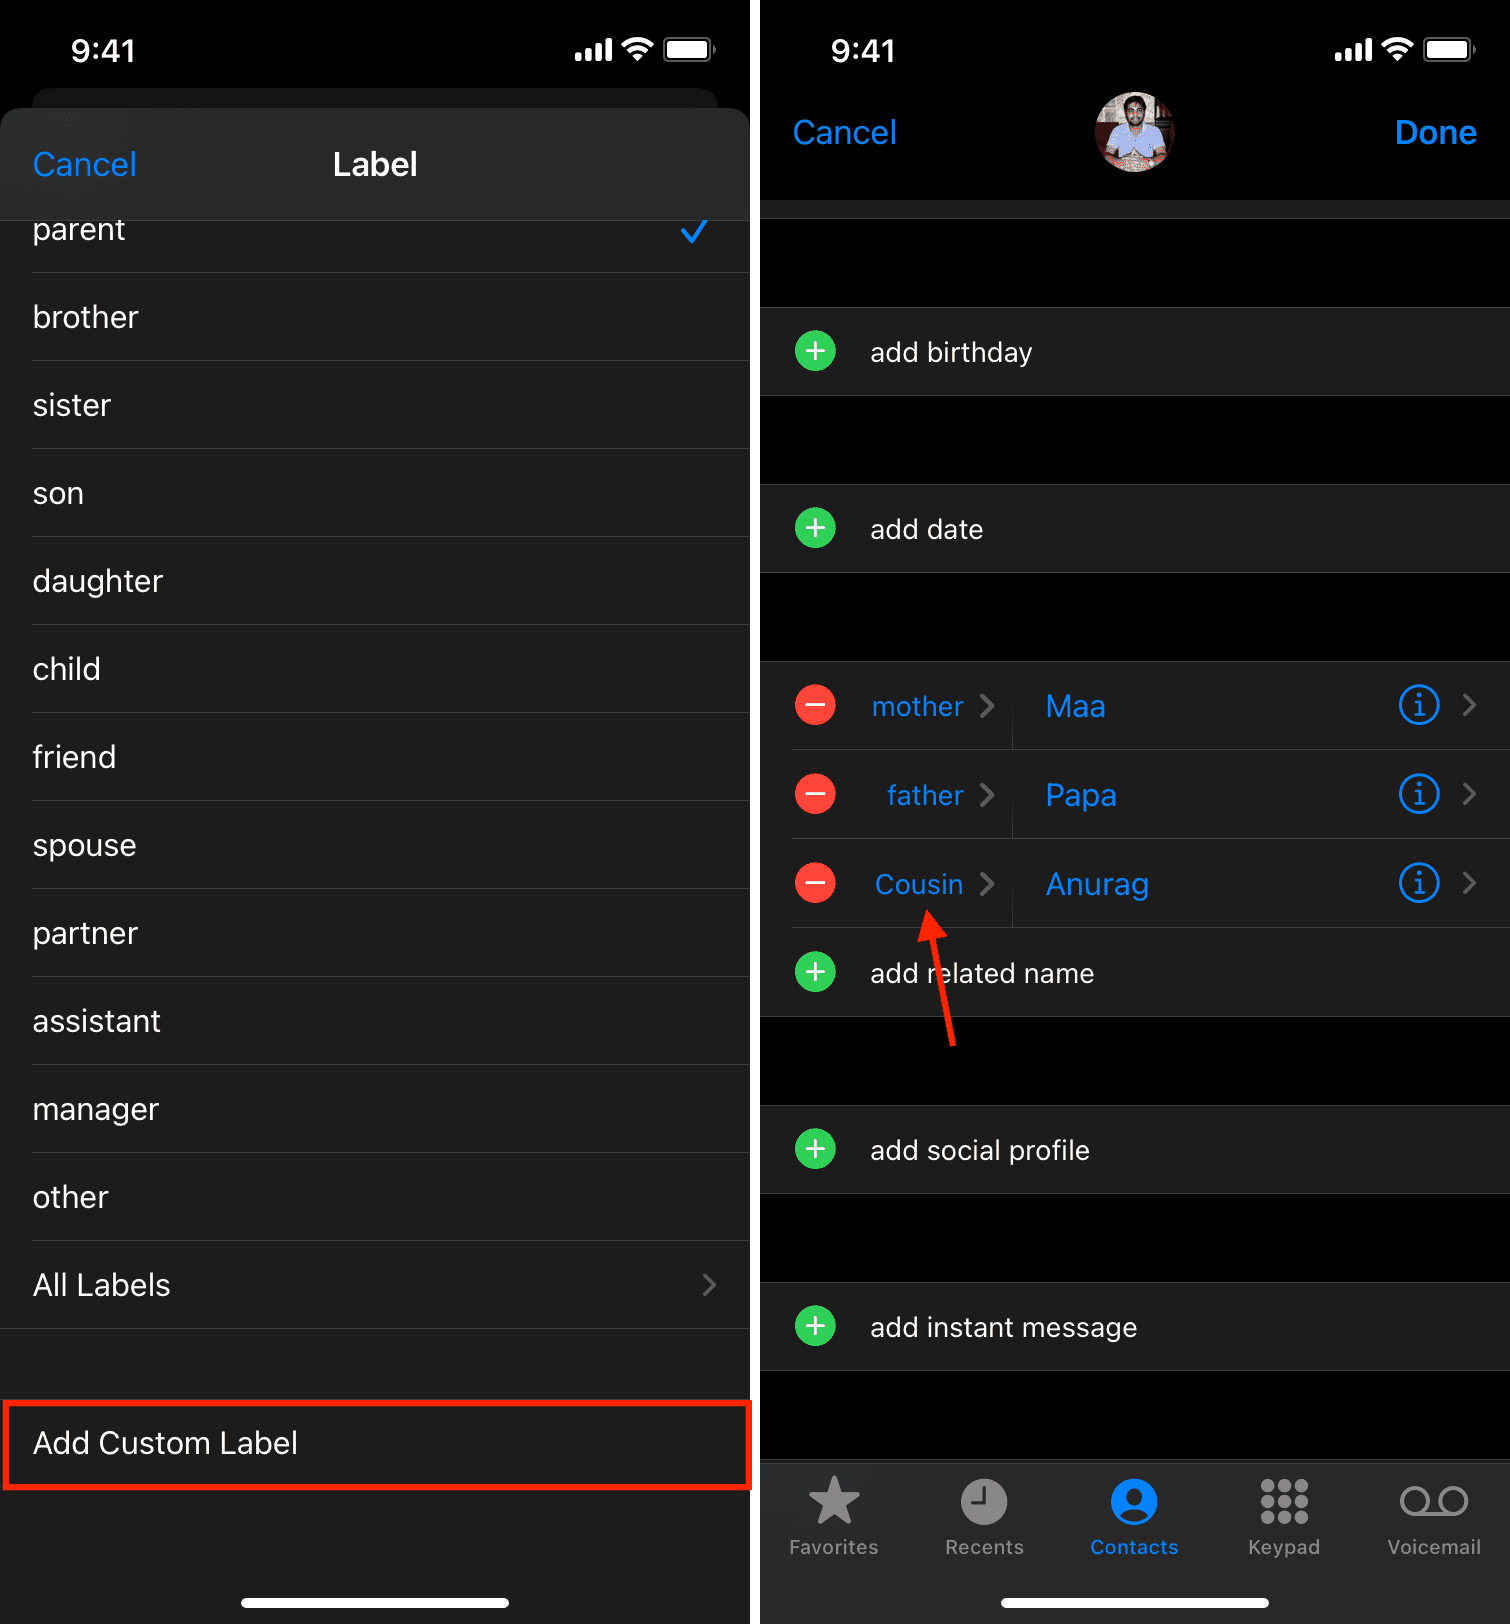 Add Custom Label to iPhone contact